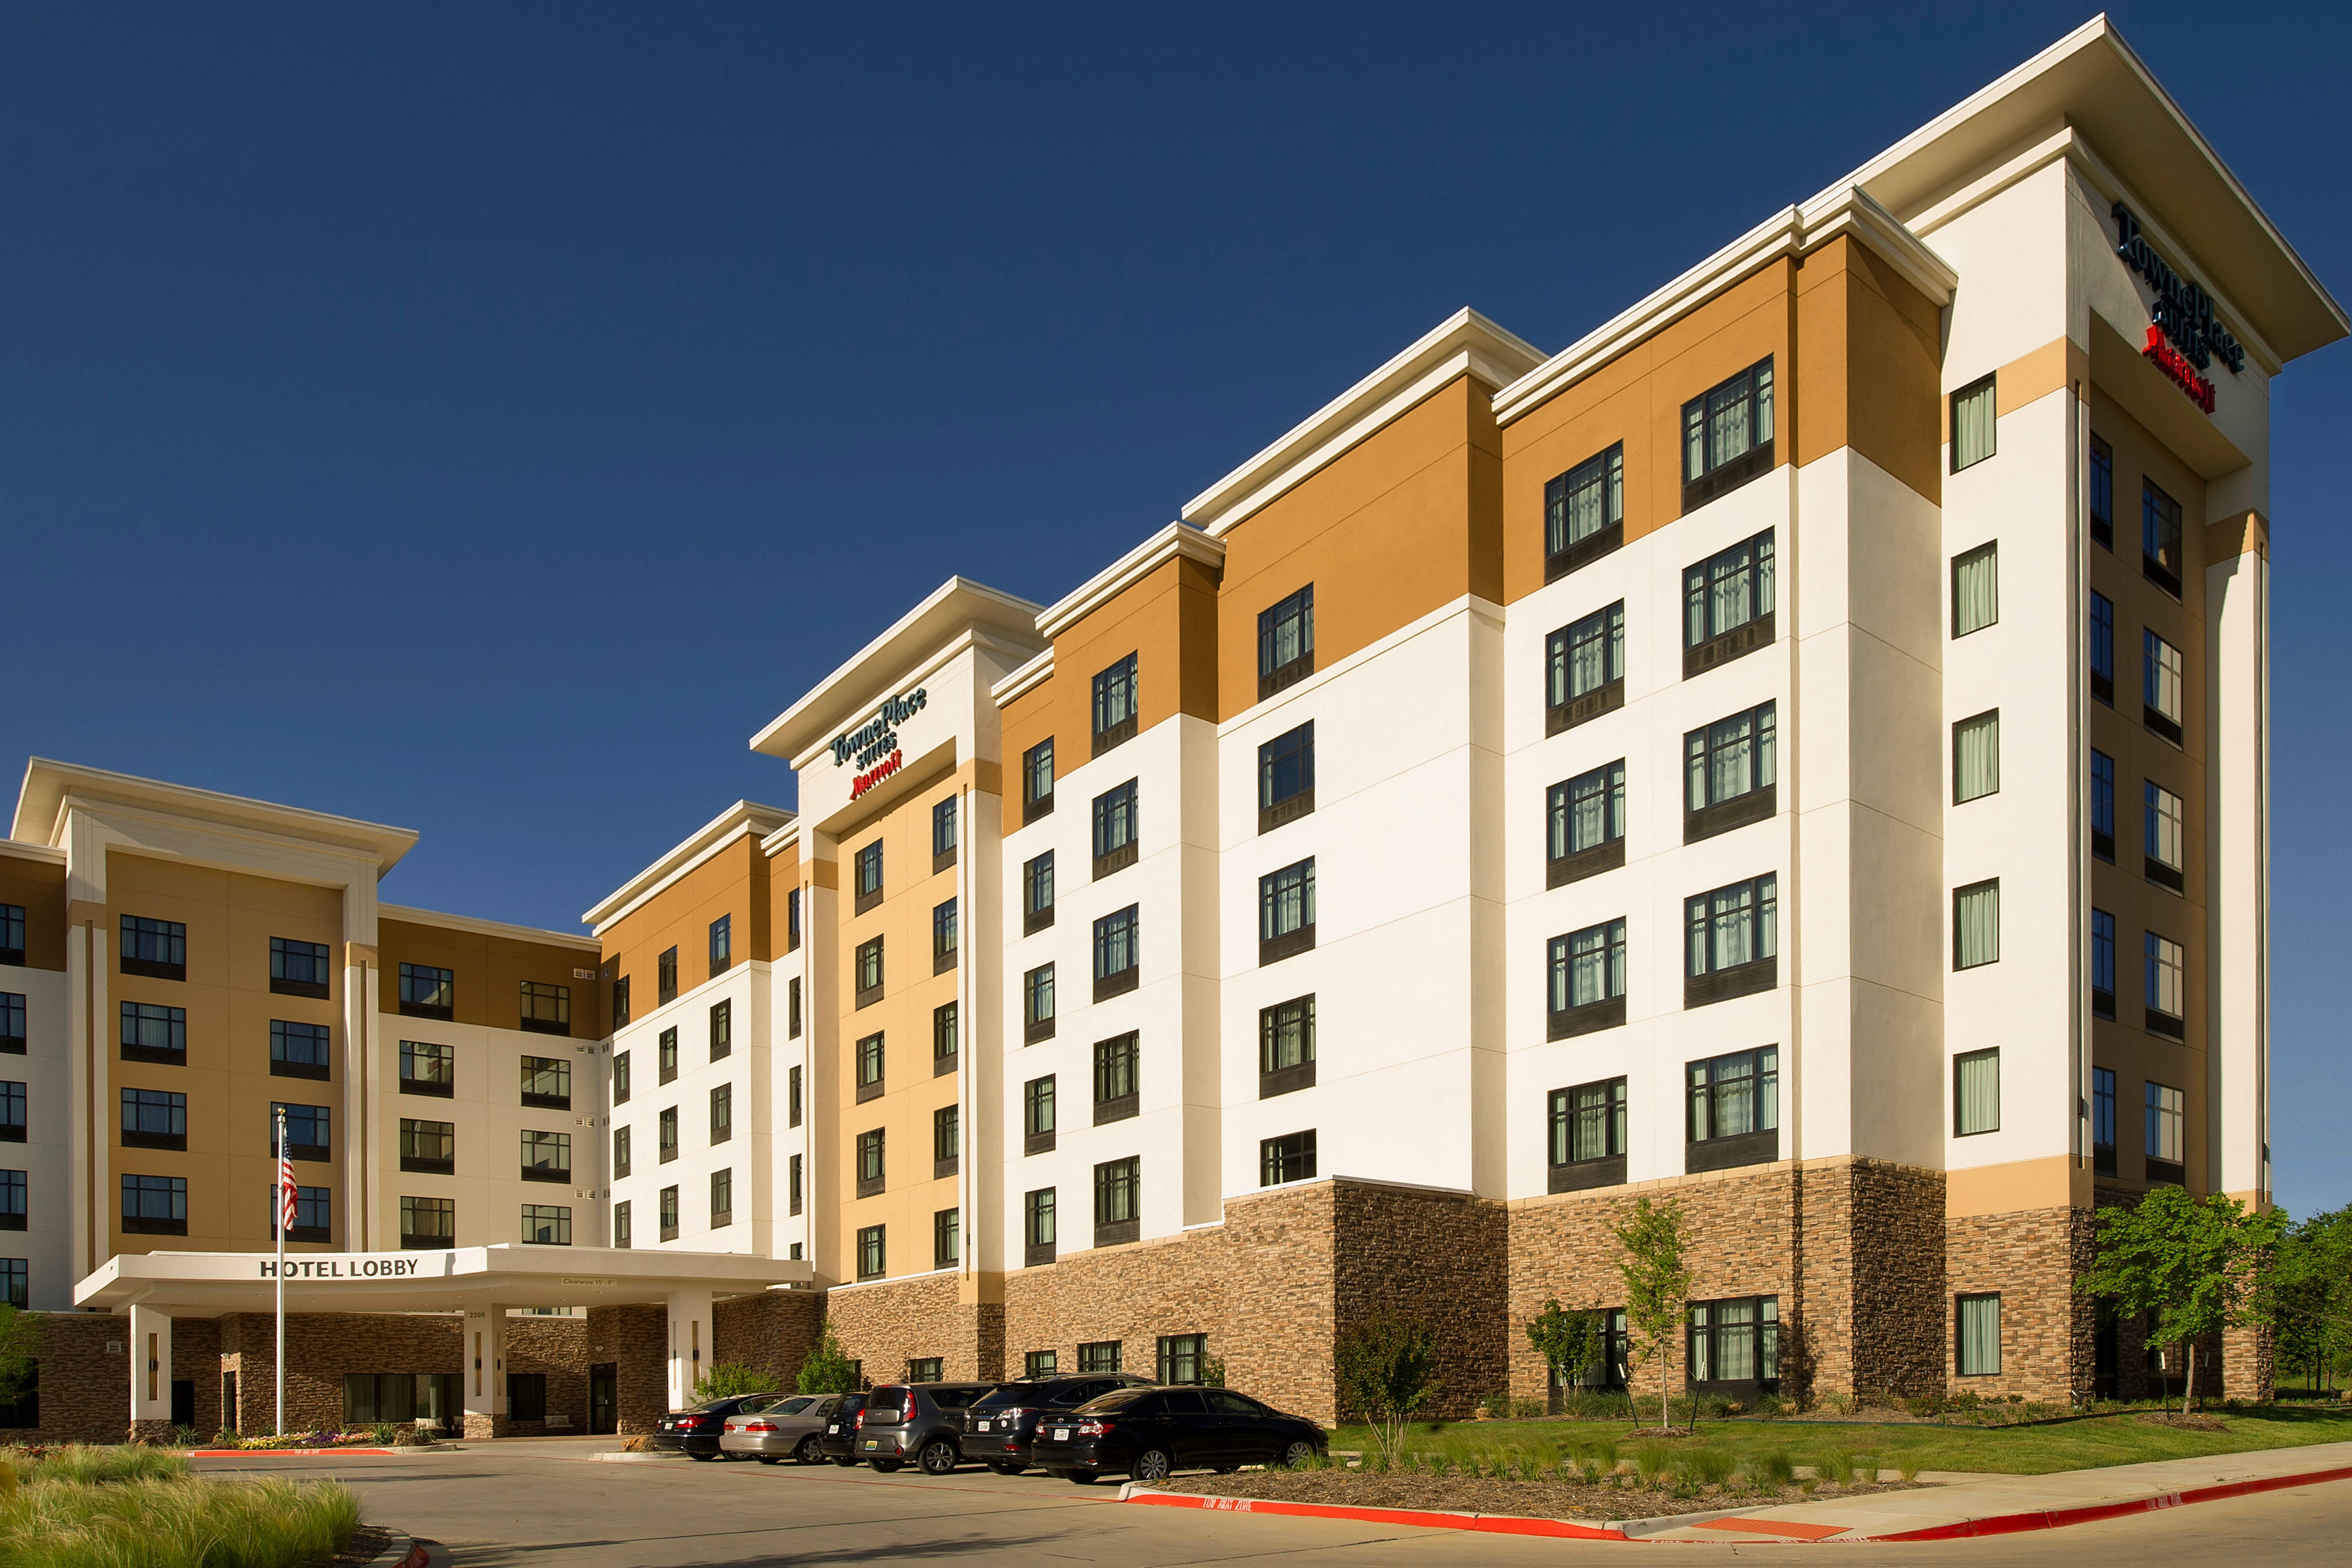 Photo of TownePlace Suites Dallas DFW Airport North/Grapevine, Grapevine, TX